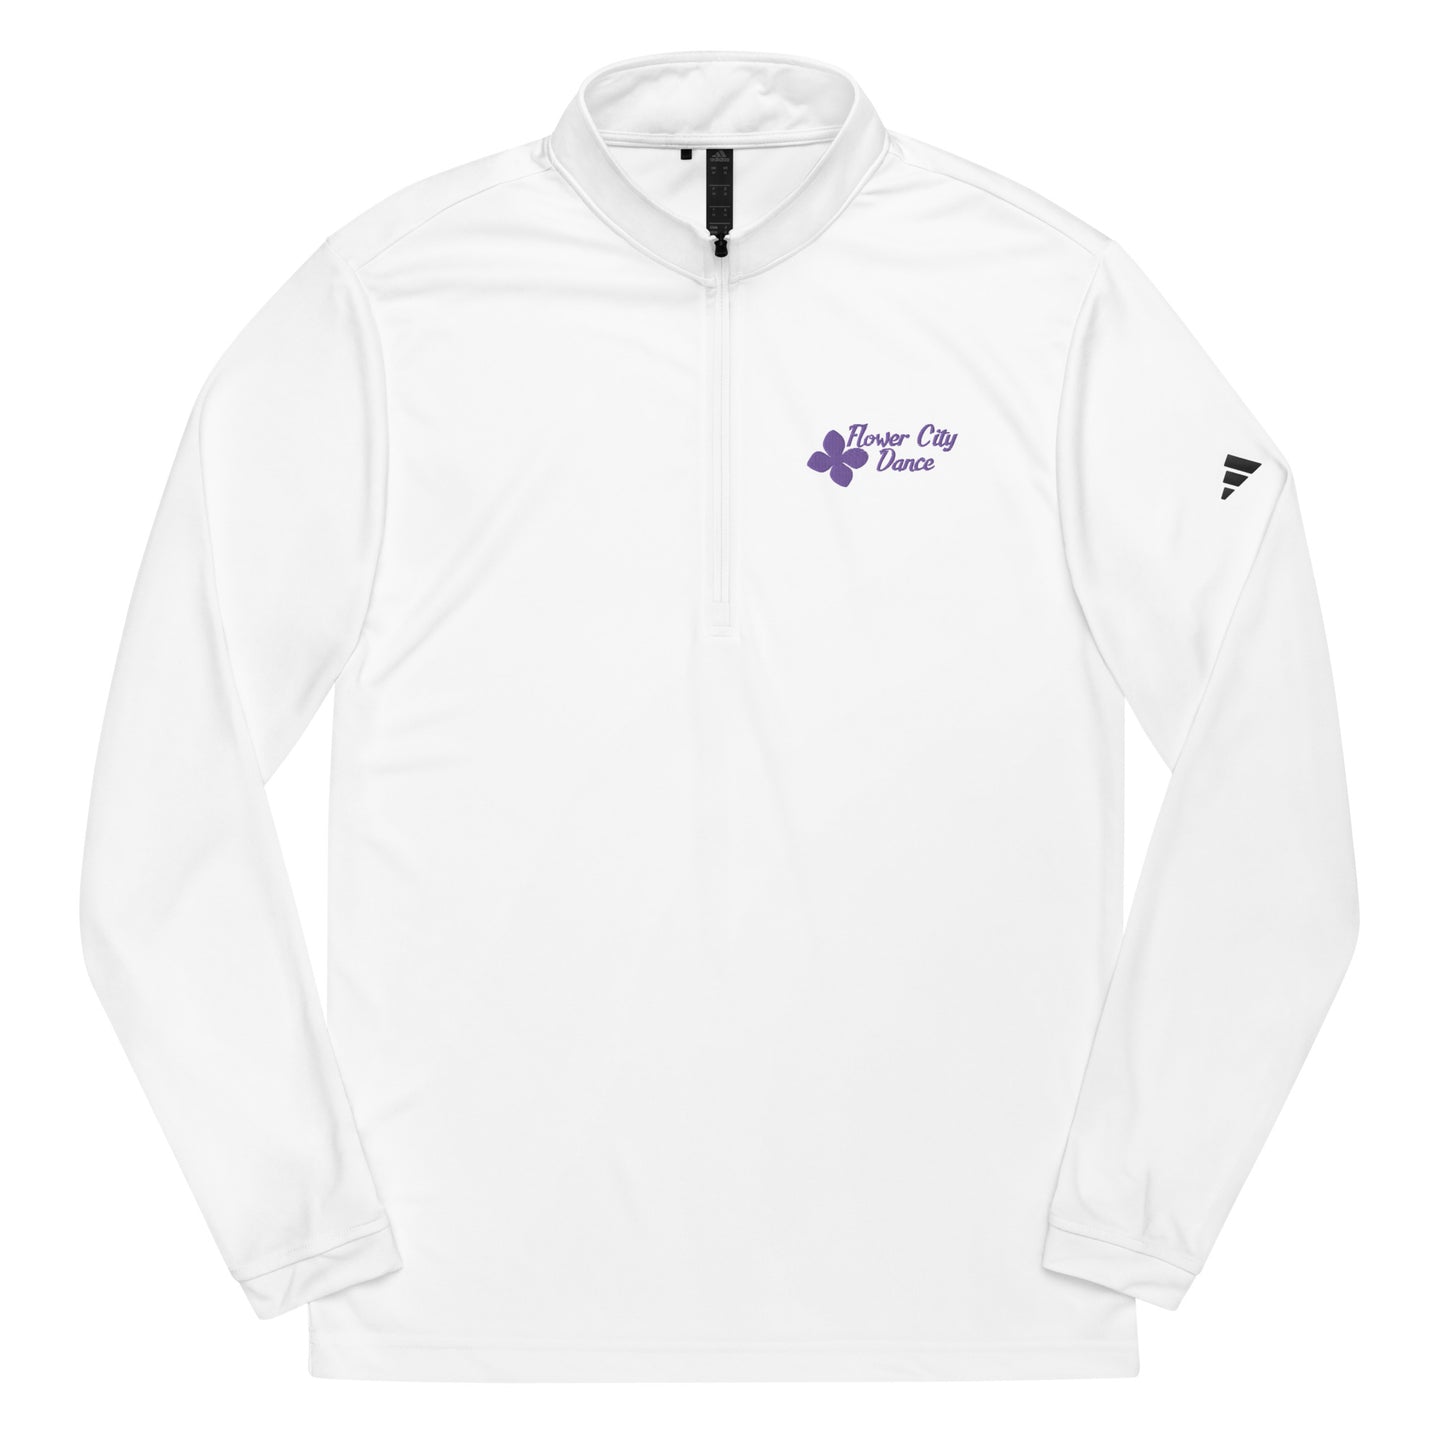 FCD Embroidered Adidas Quarter zip pullover